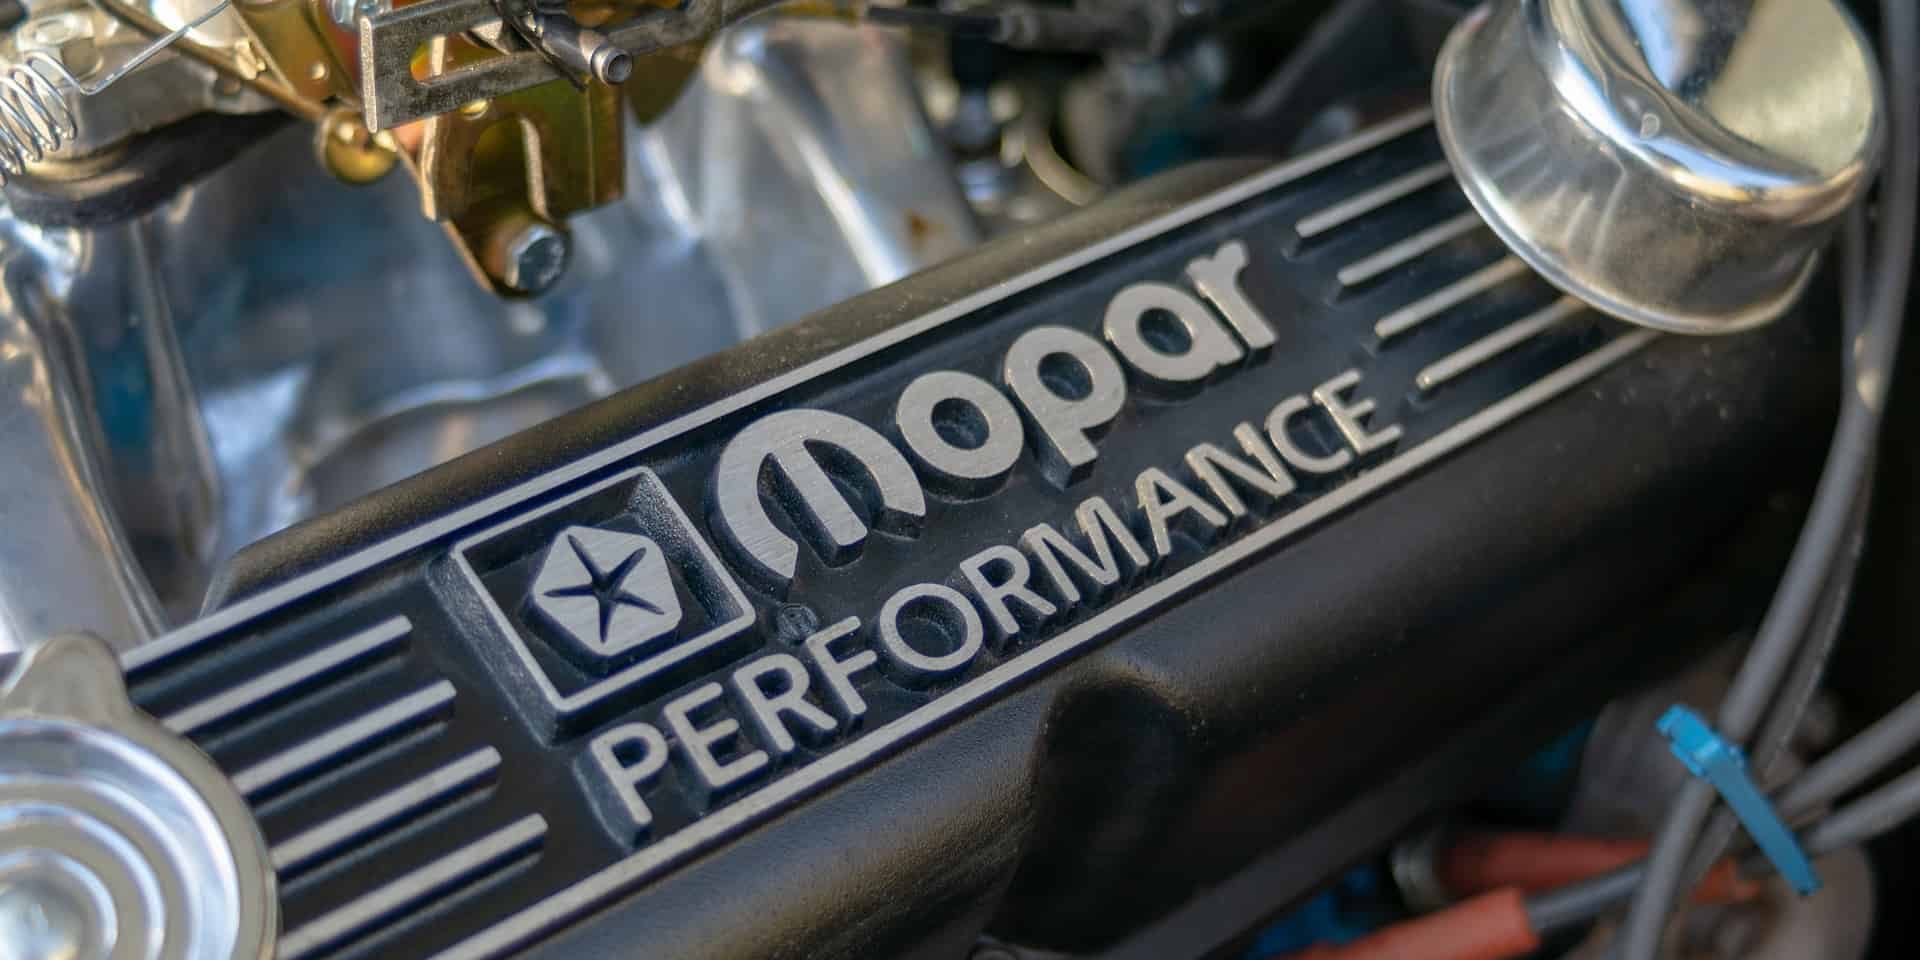 Why Is Mopar Banned From Nascar